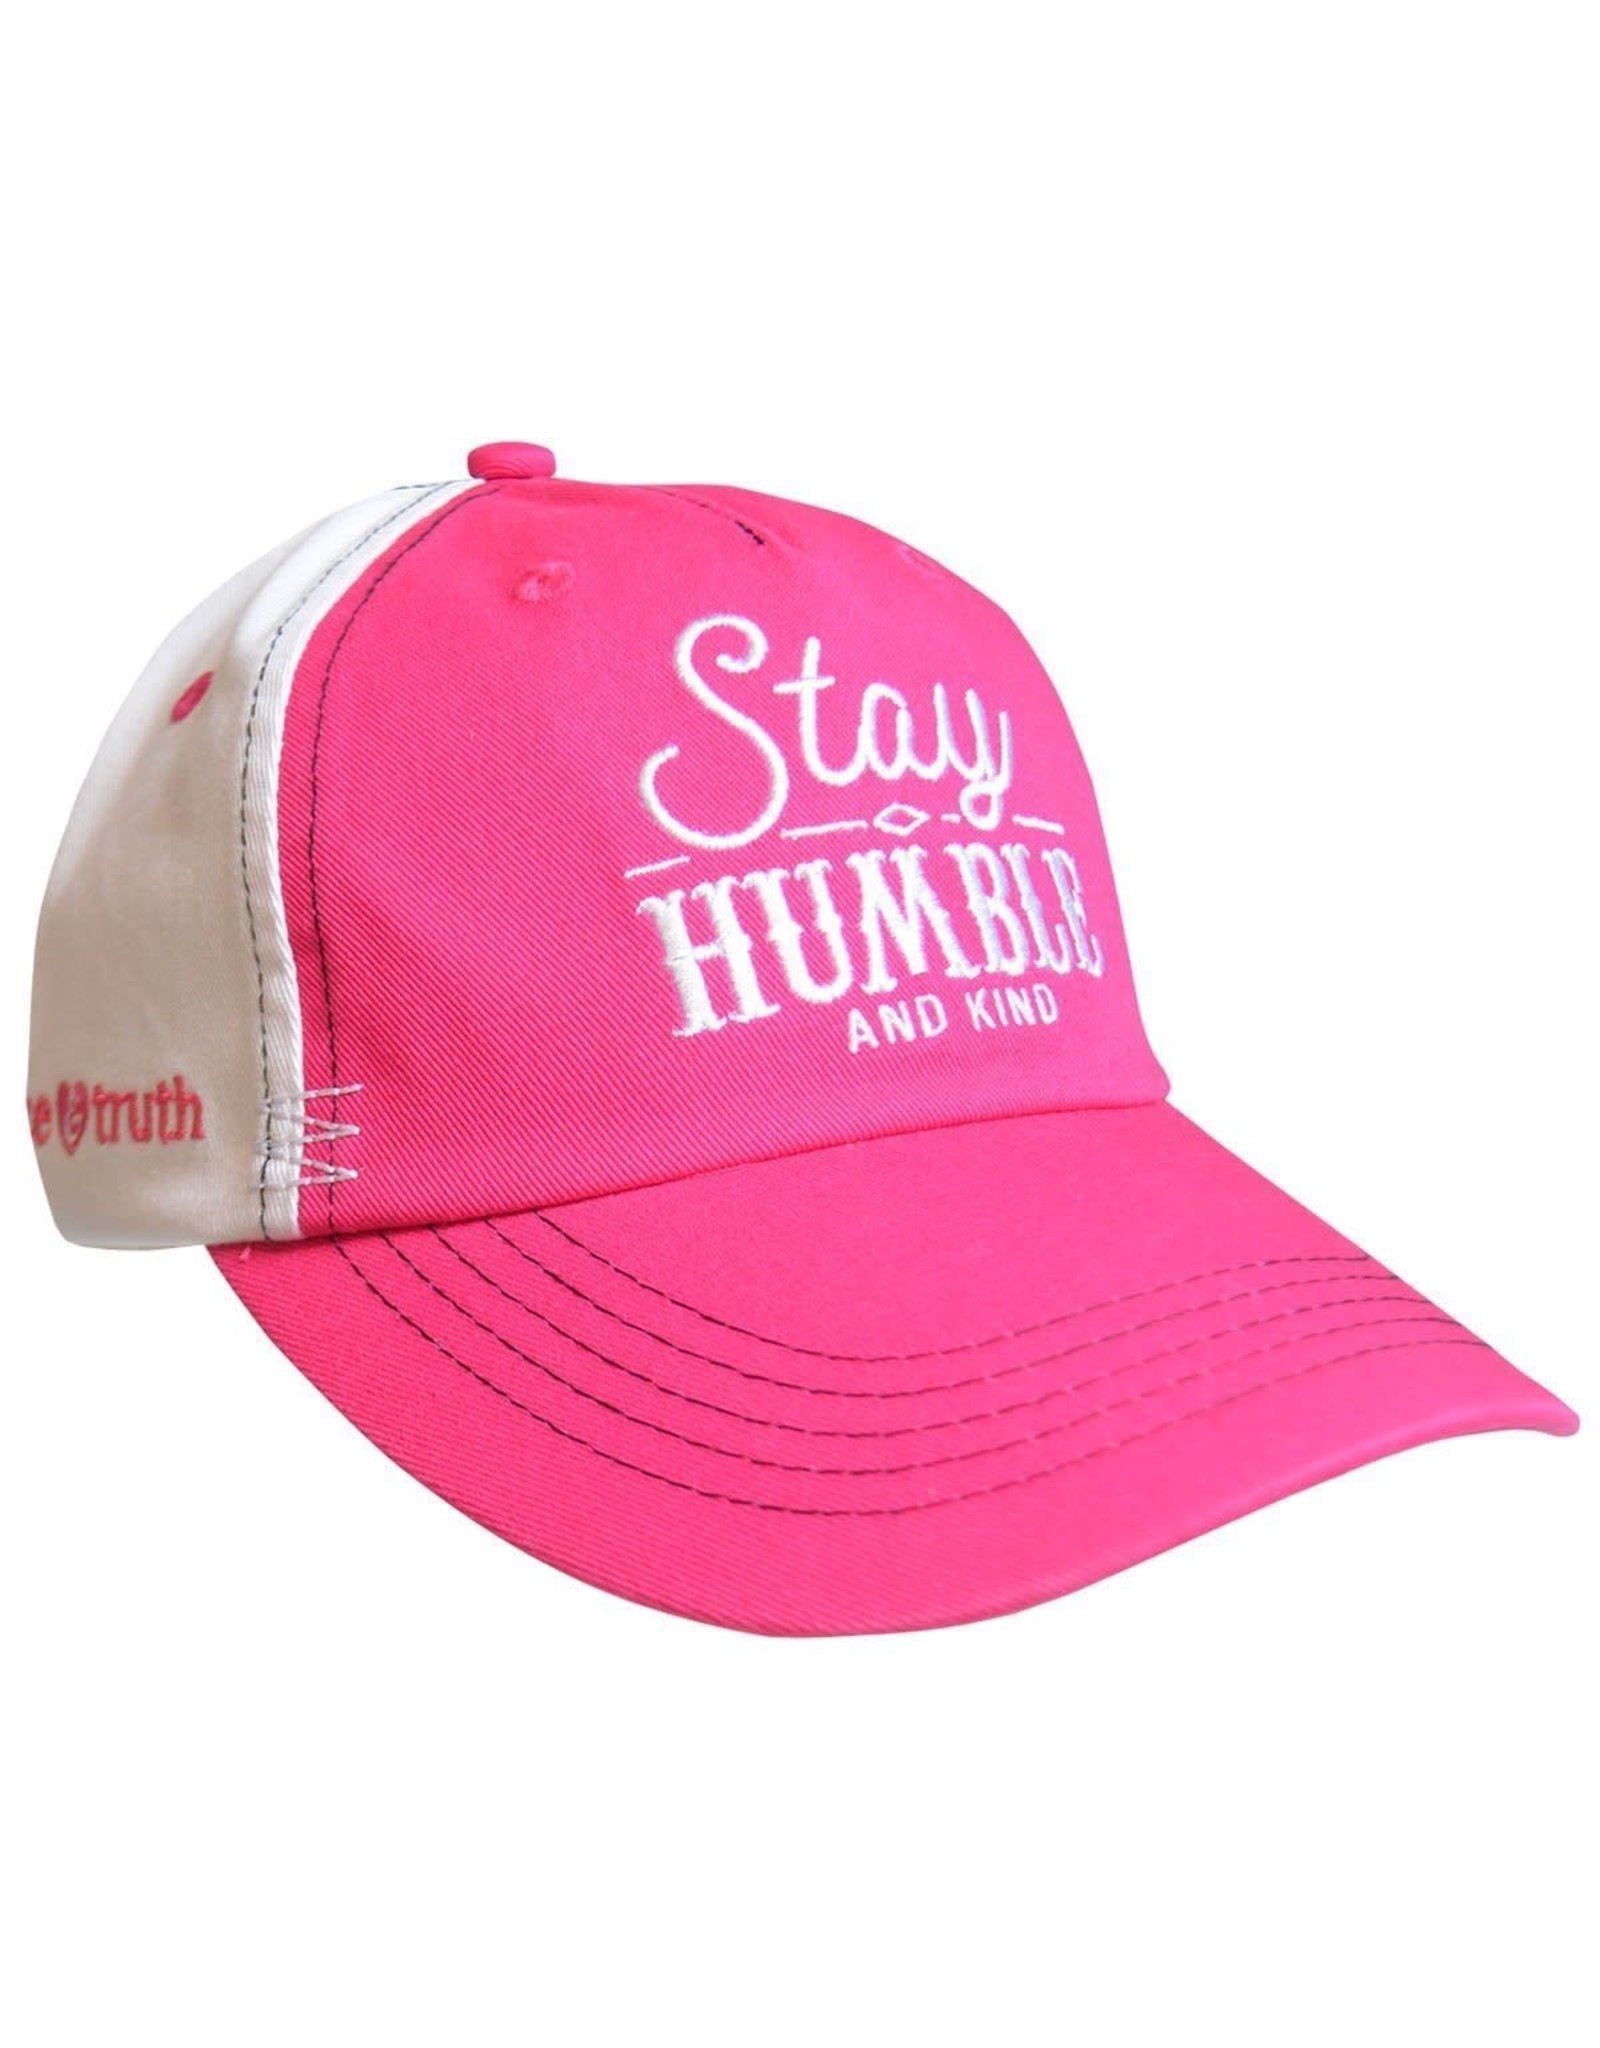 grace & truth grace & truth® Stay Humble Womens Hat